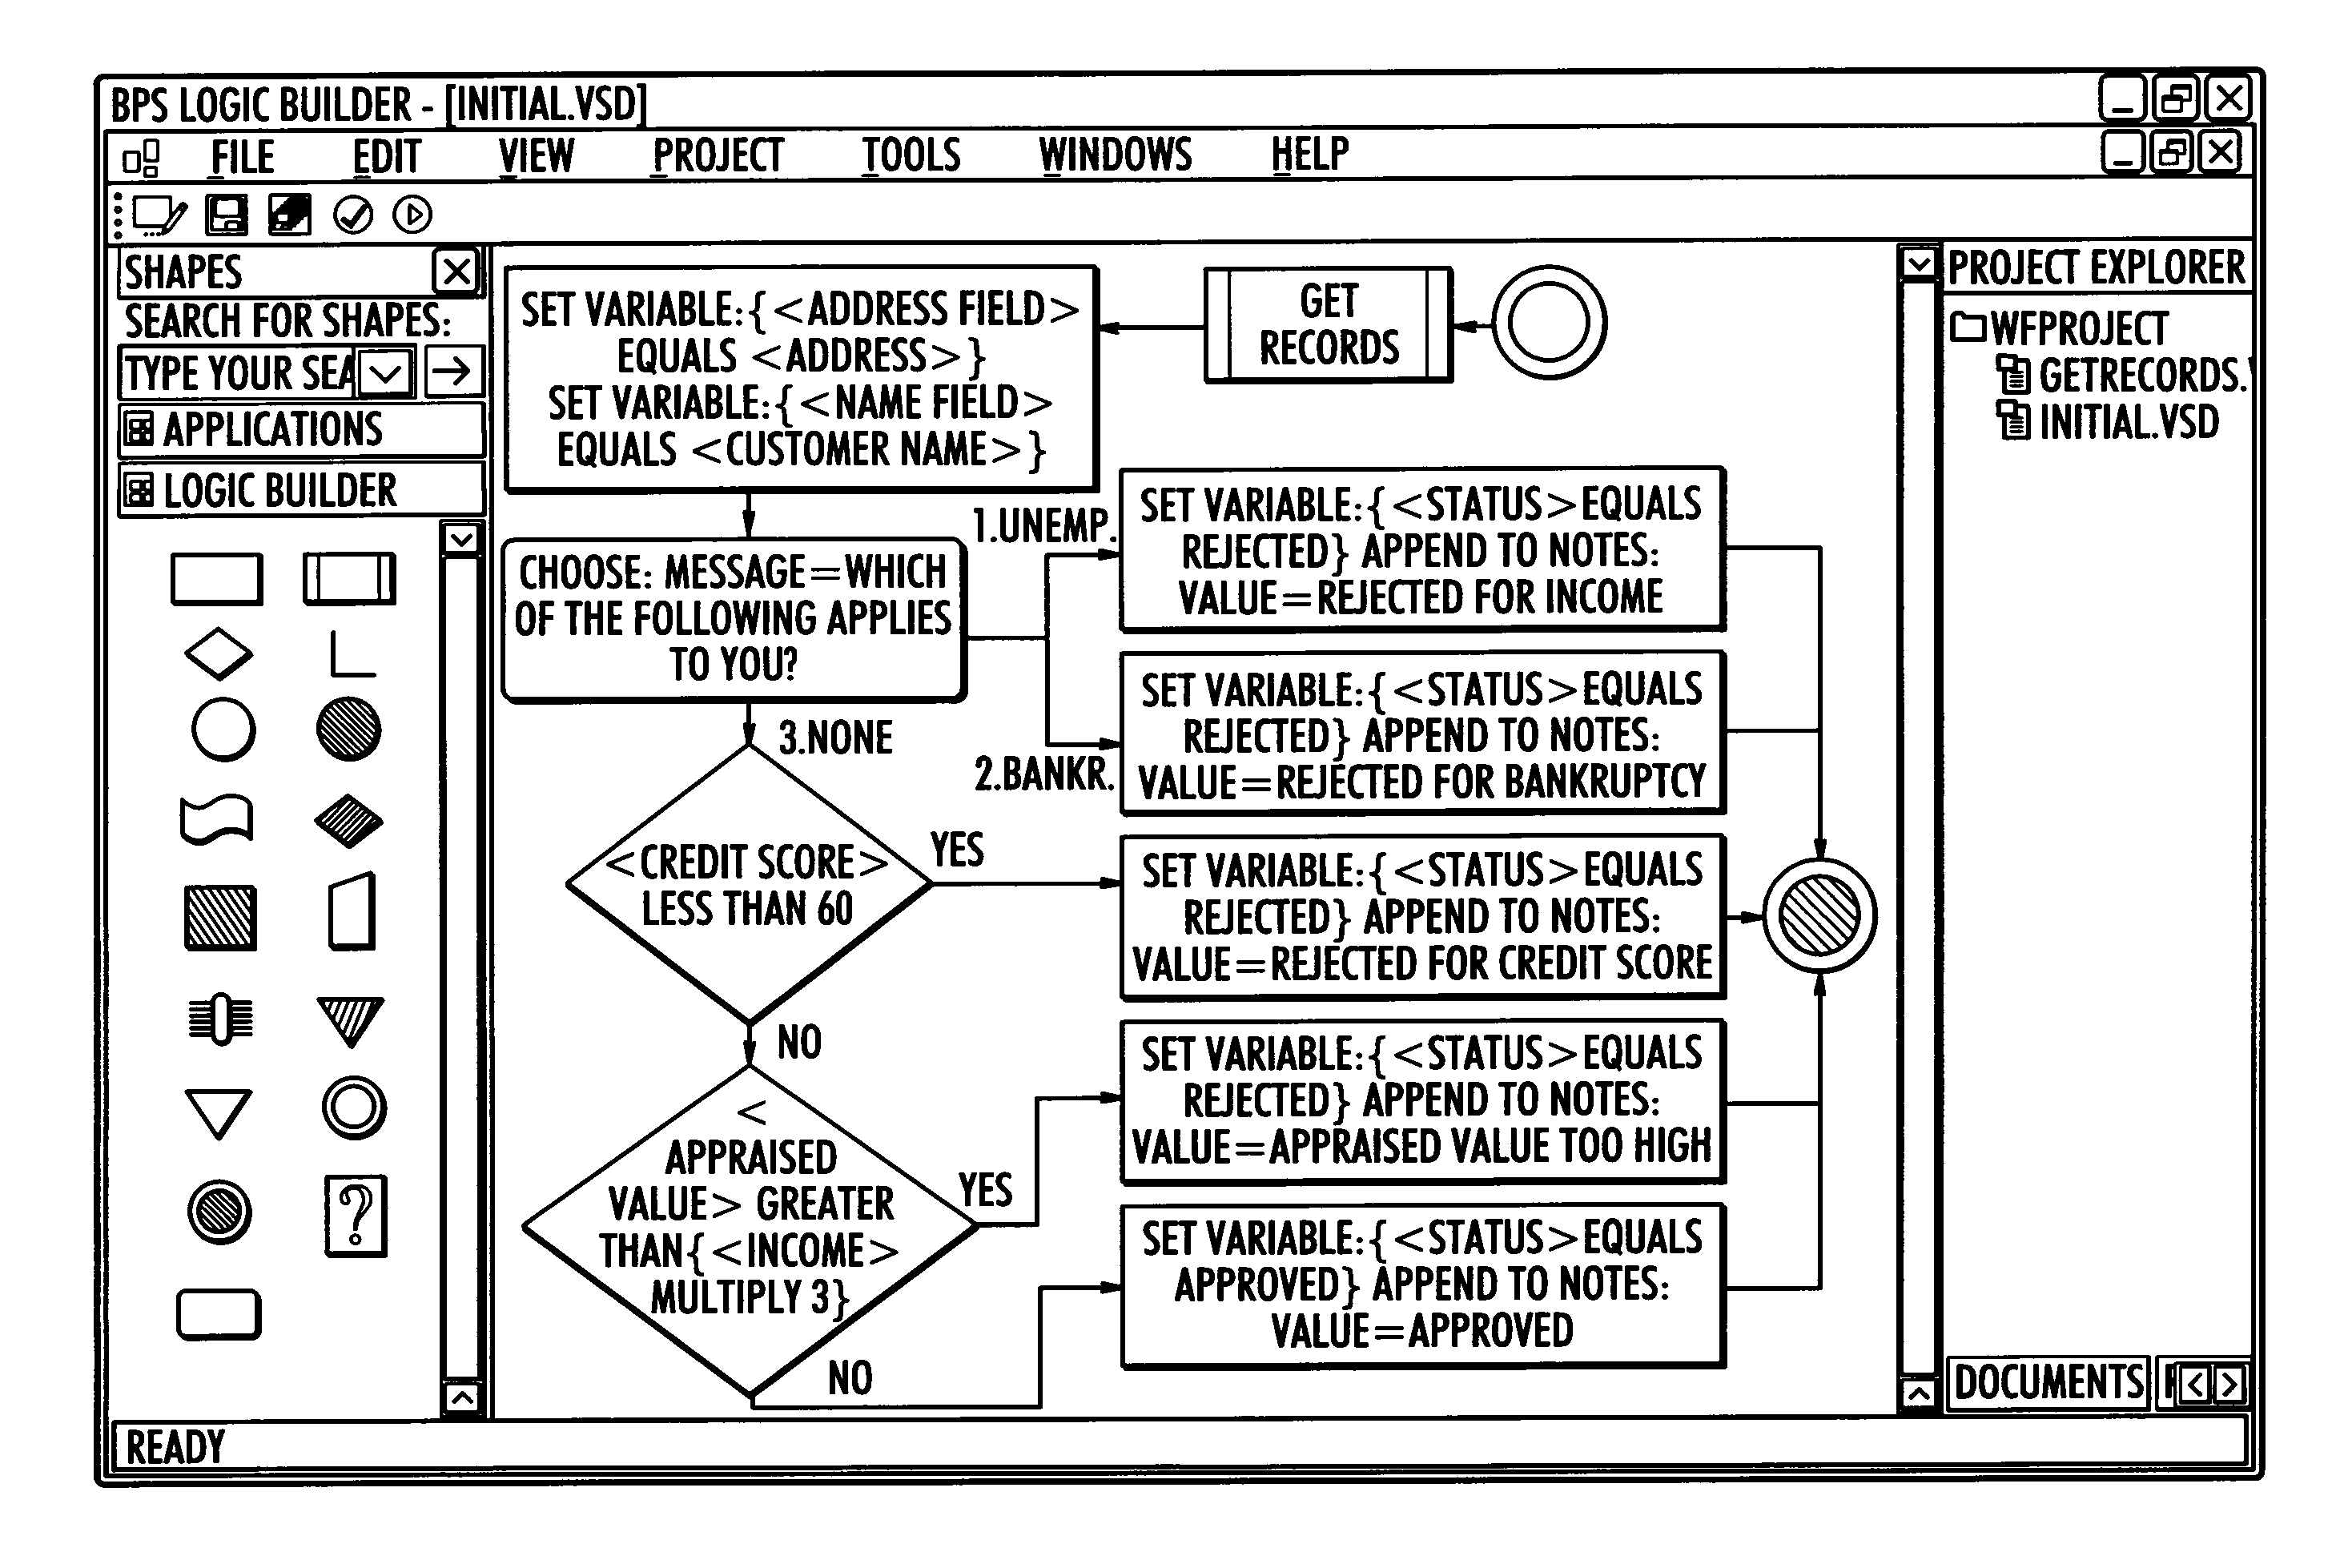 Apparatus for generating software logic rules by flowchart design